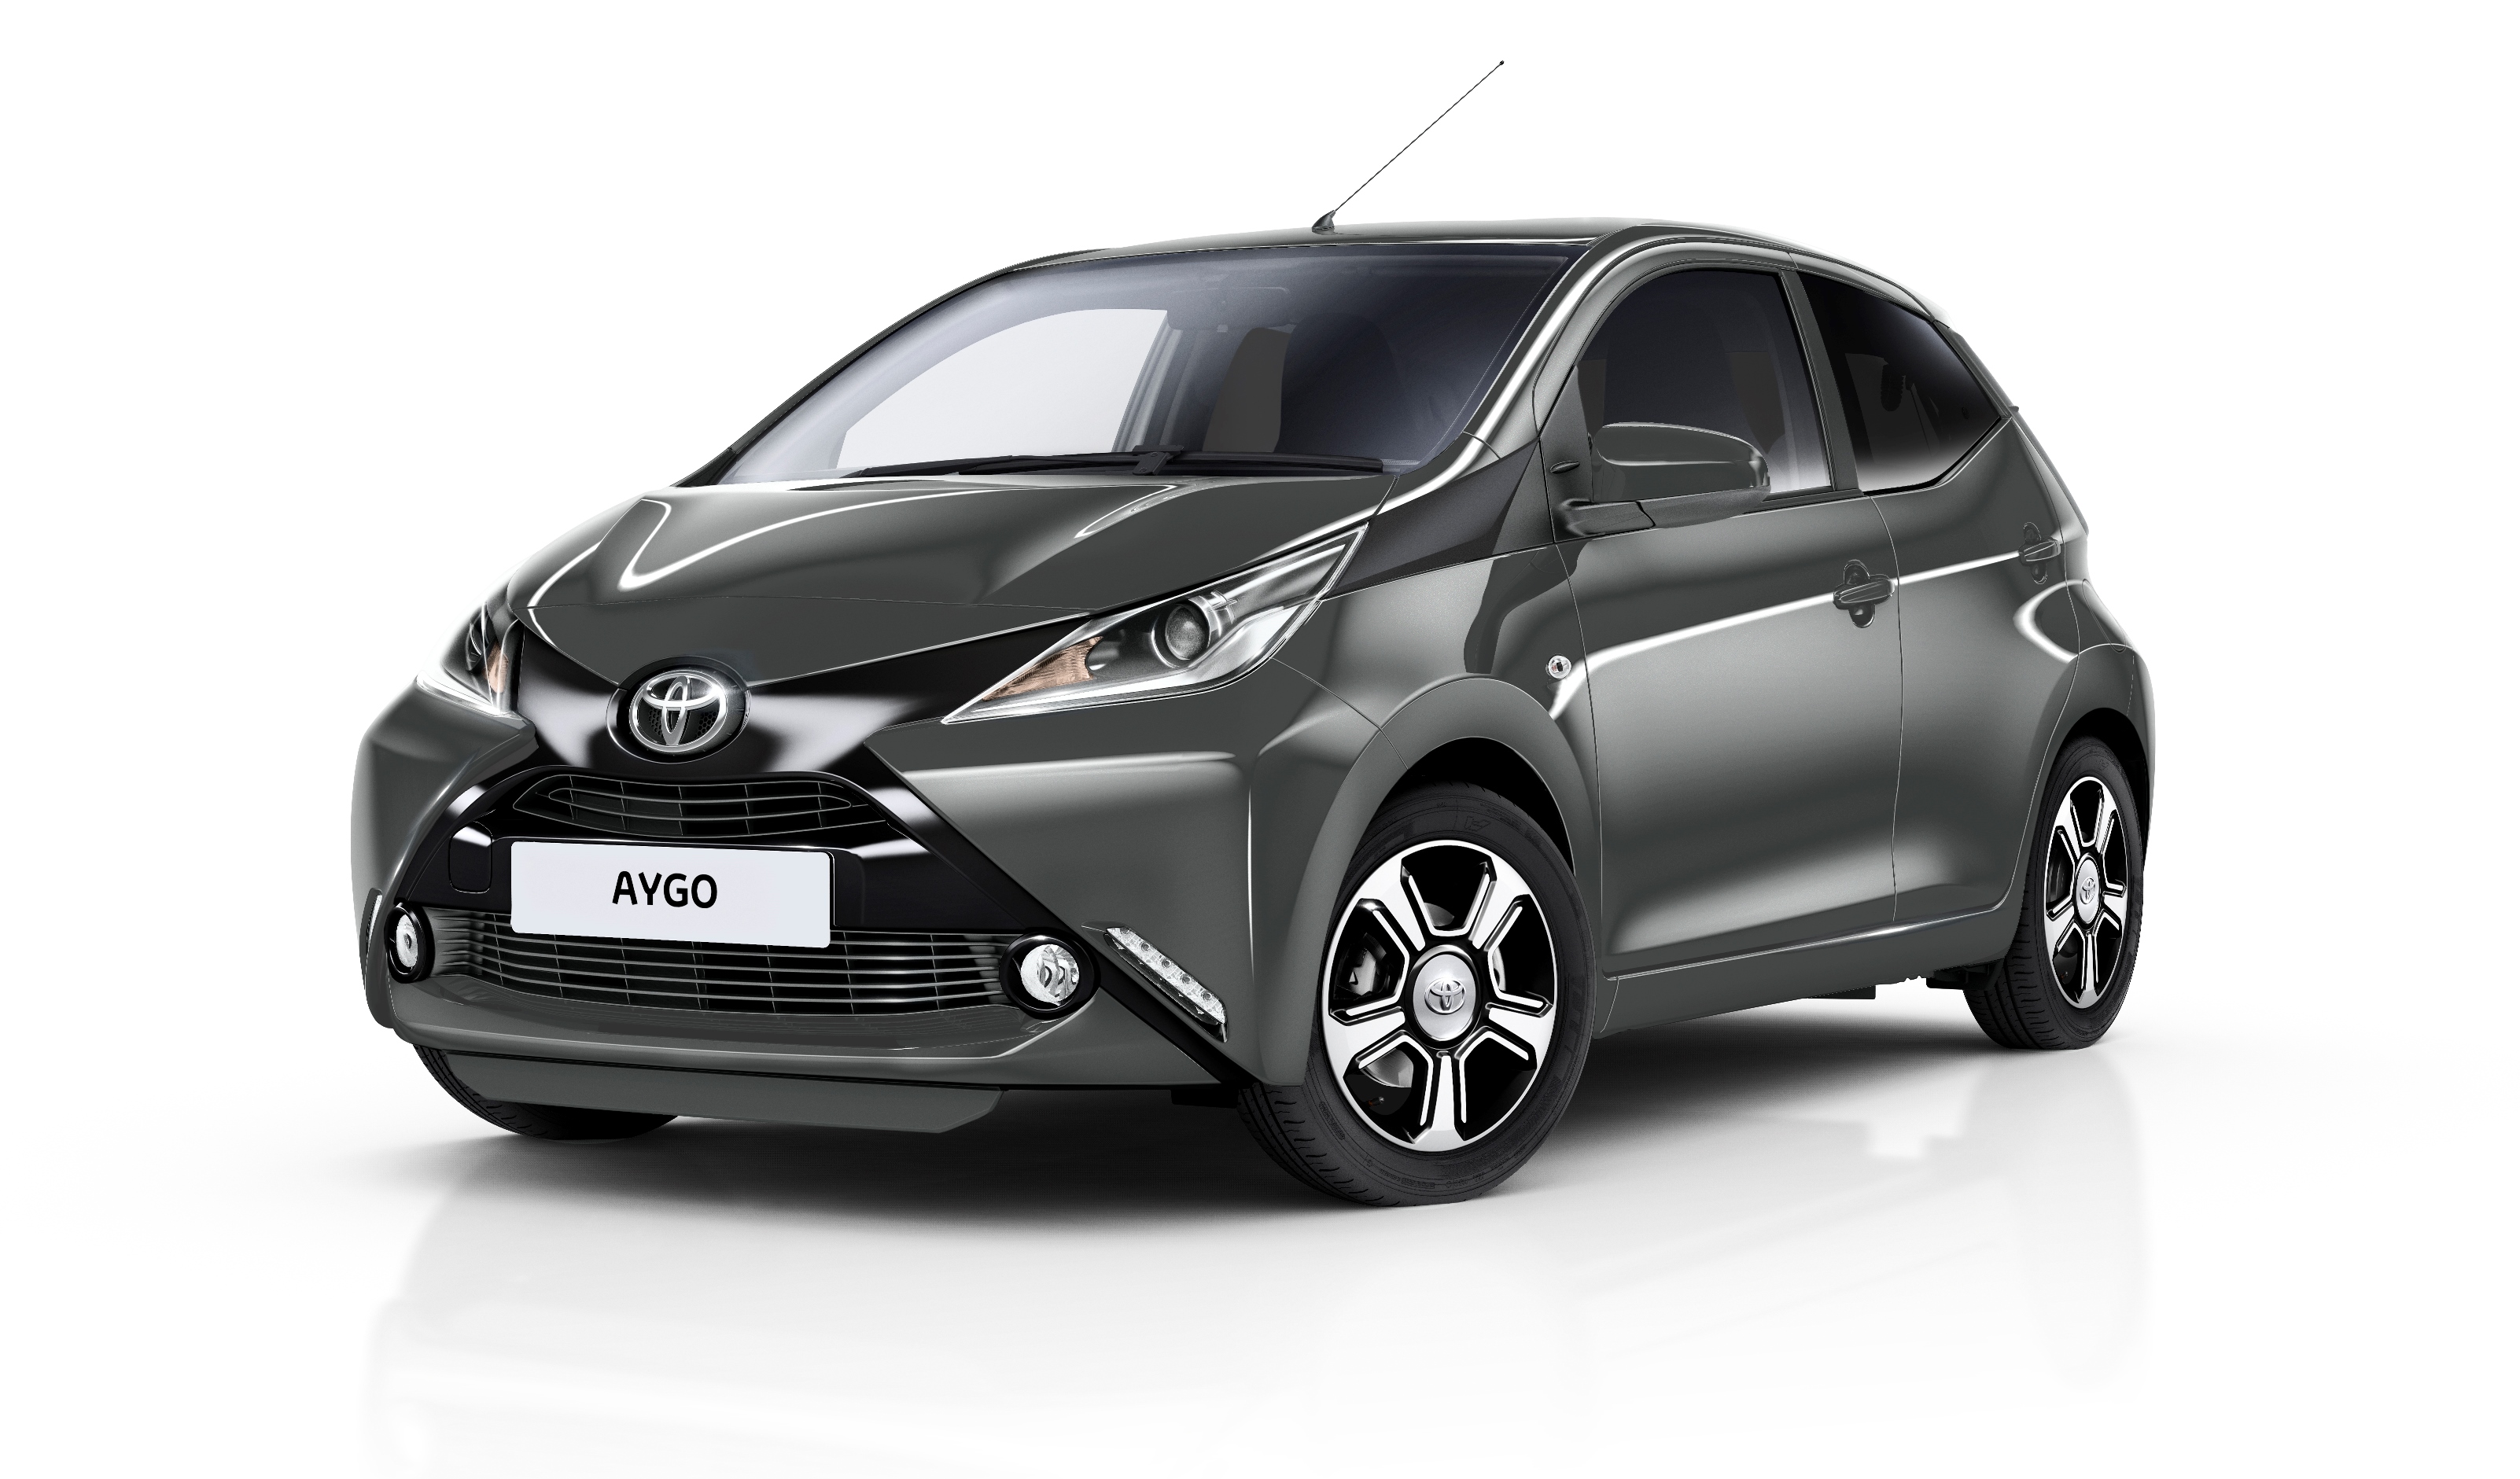 https://s1.cdn.autoevolution.com/images/news/2017-toyota-aygo-x-clusiv-features-more-kit-funroof-becomes-an-optional-extra-115372_1.jpg